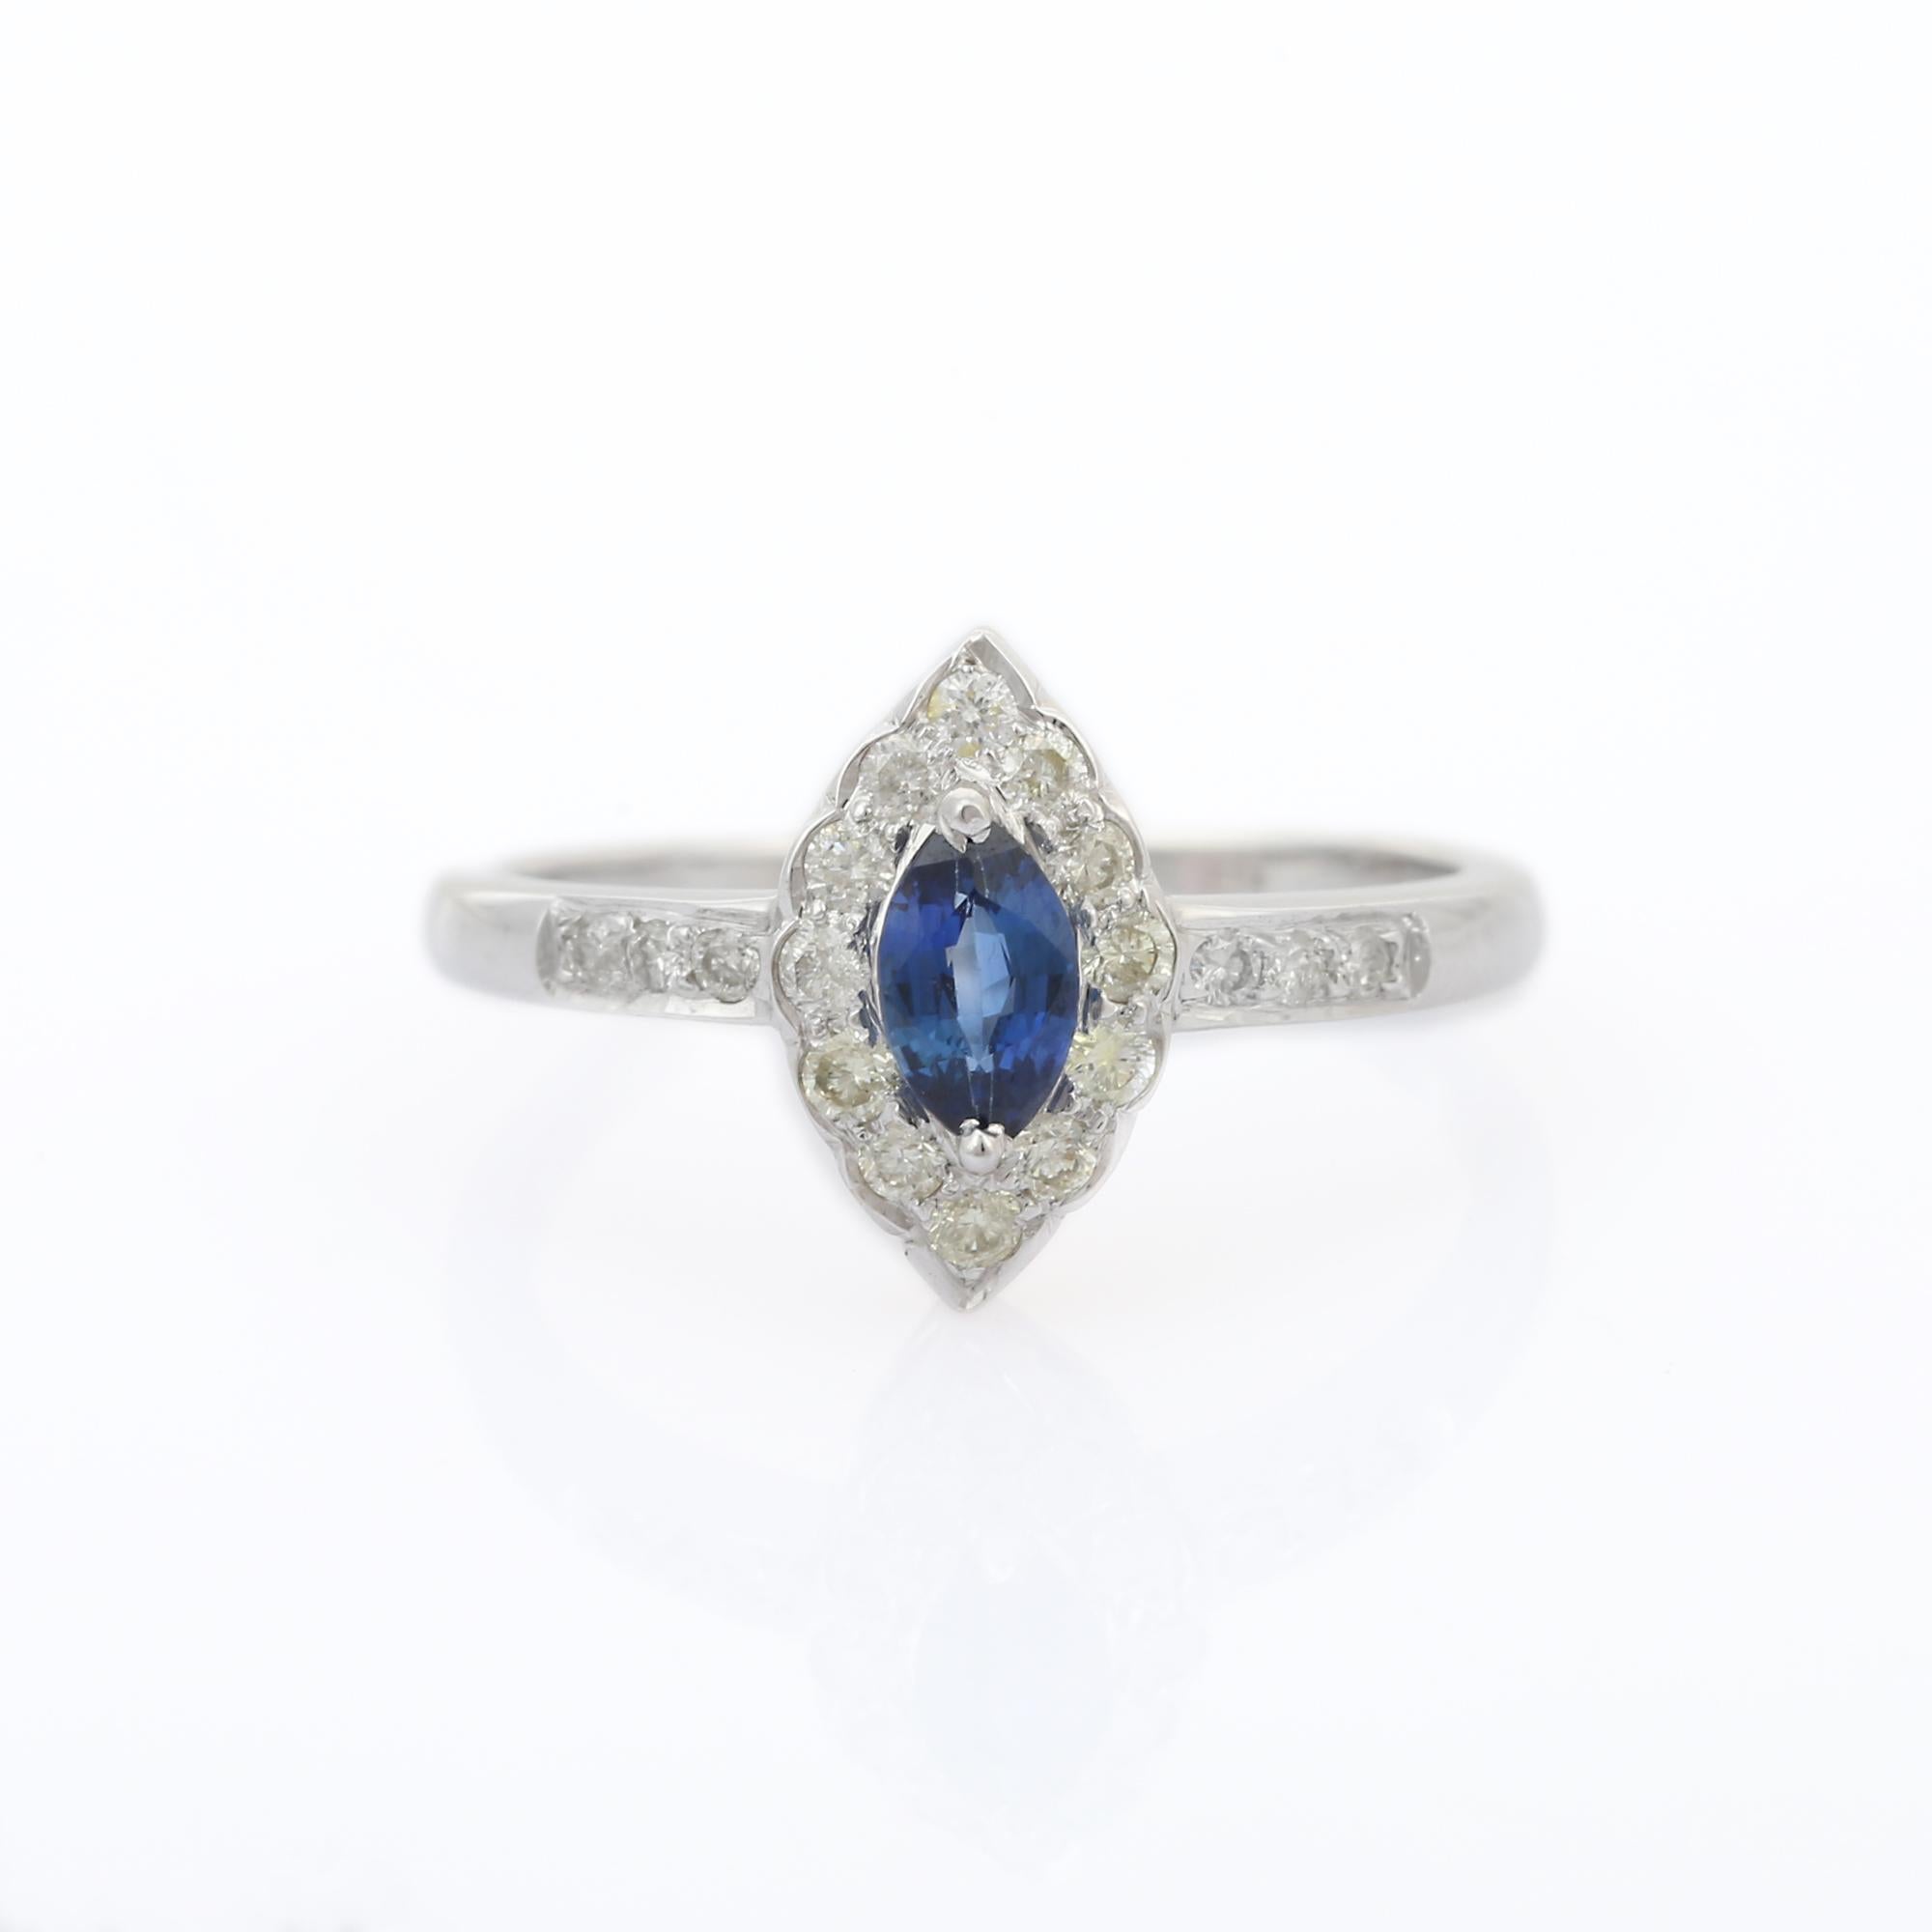 For Sale:  Solid 14K White Gold Marquise Blue Sapphire and Halo Diamond Engagement Ring 2